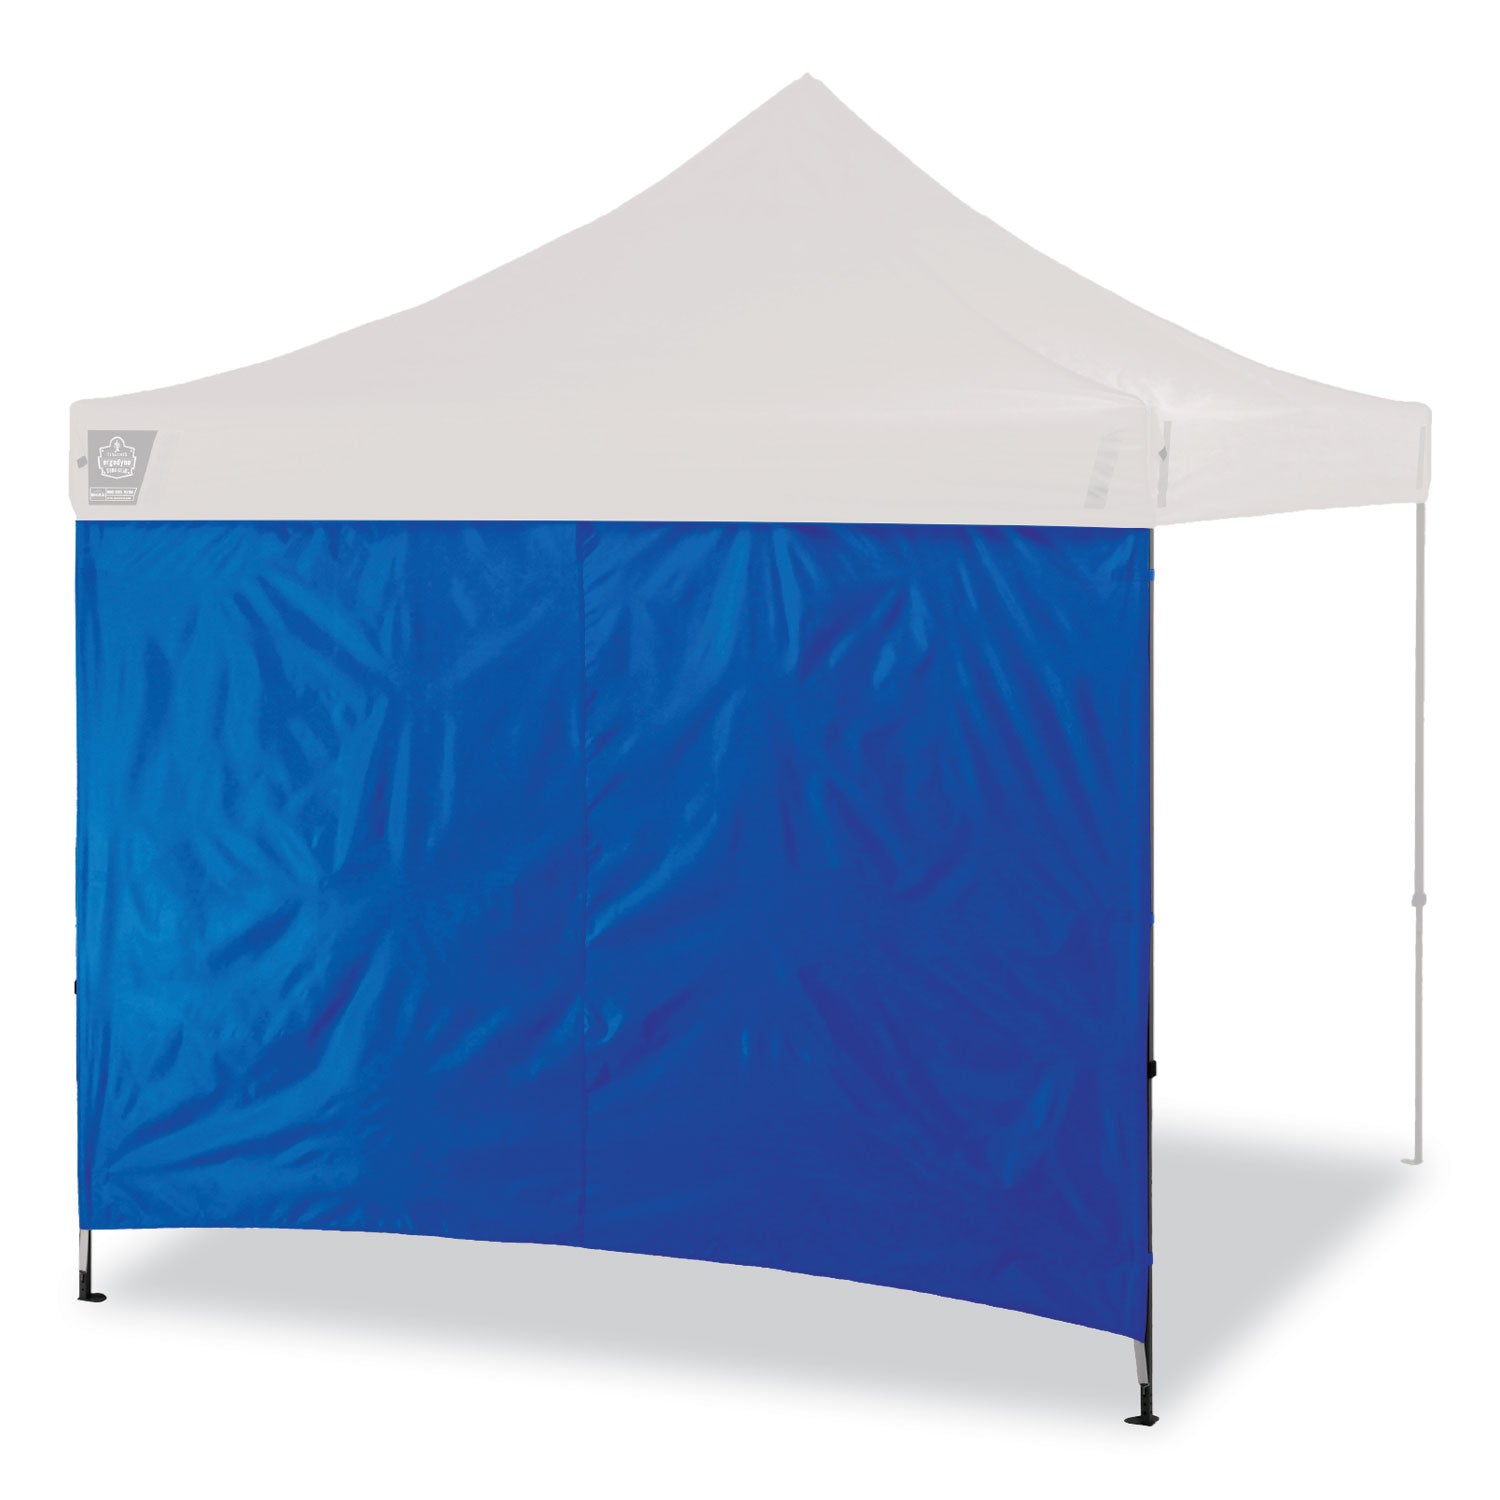 shax-6098-pop-up-tent-sidewall-single-skin-10-ft-x-10-ft-polyester-blue-ships-in-1-3-business-days_ego12997 - 1